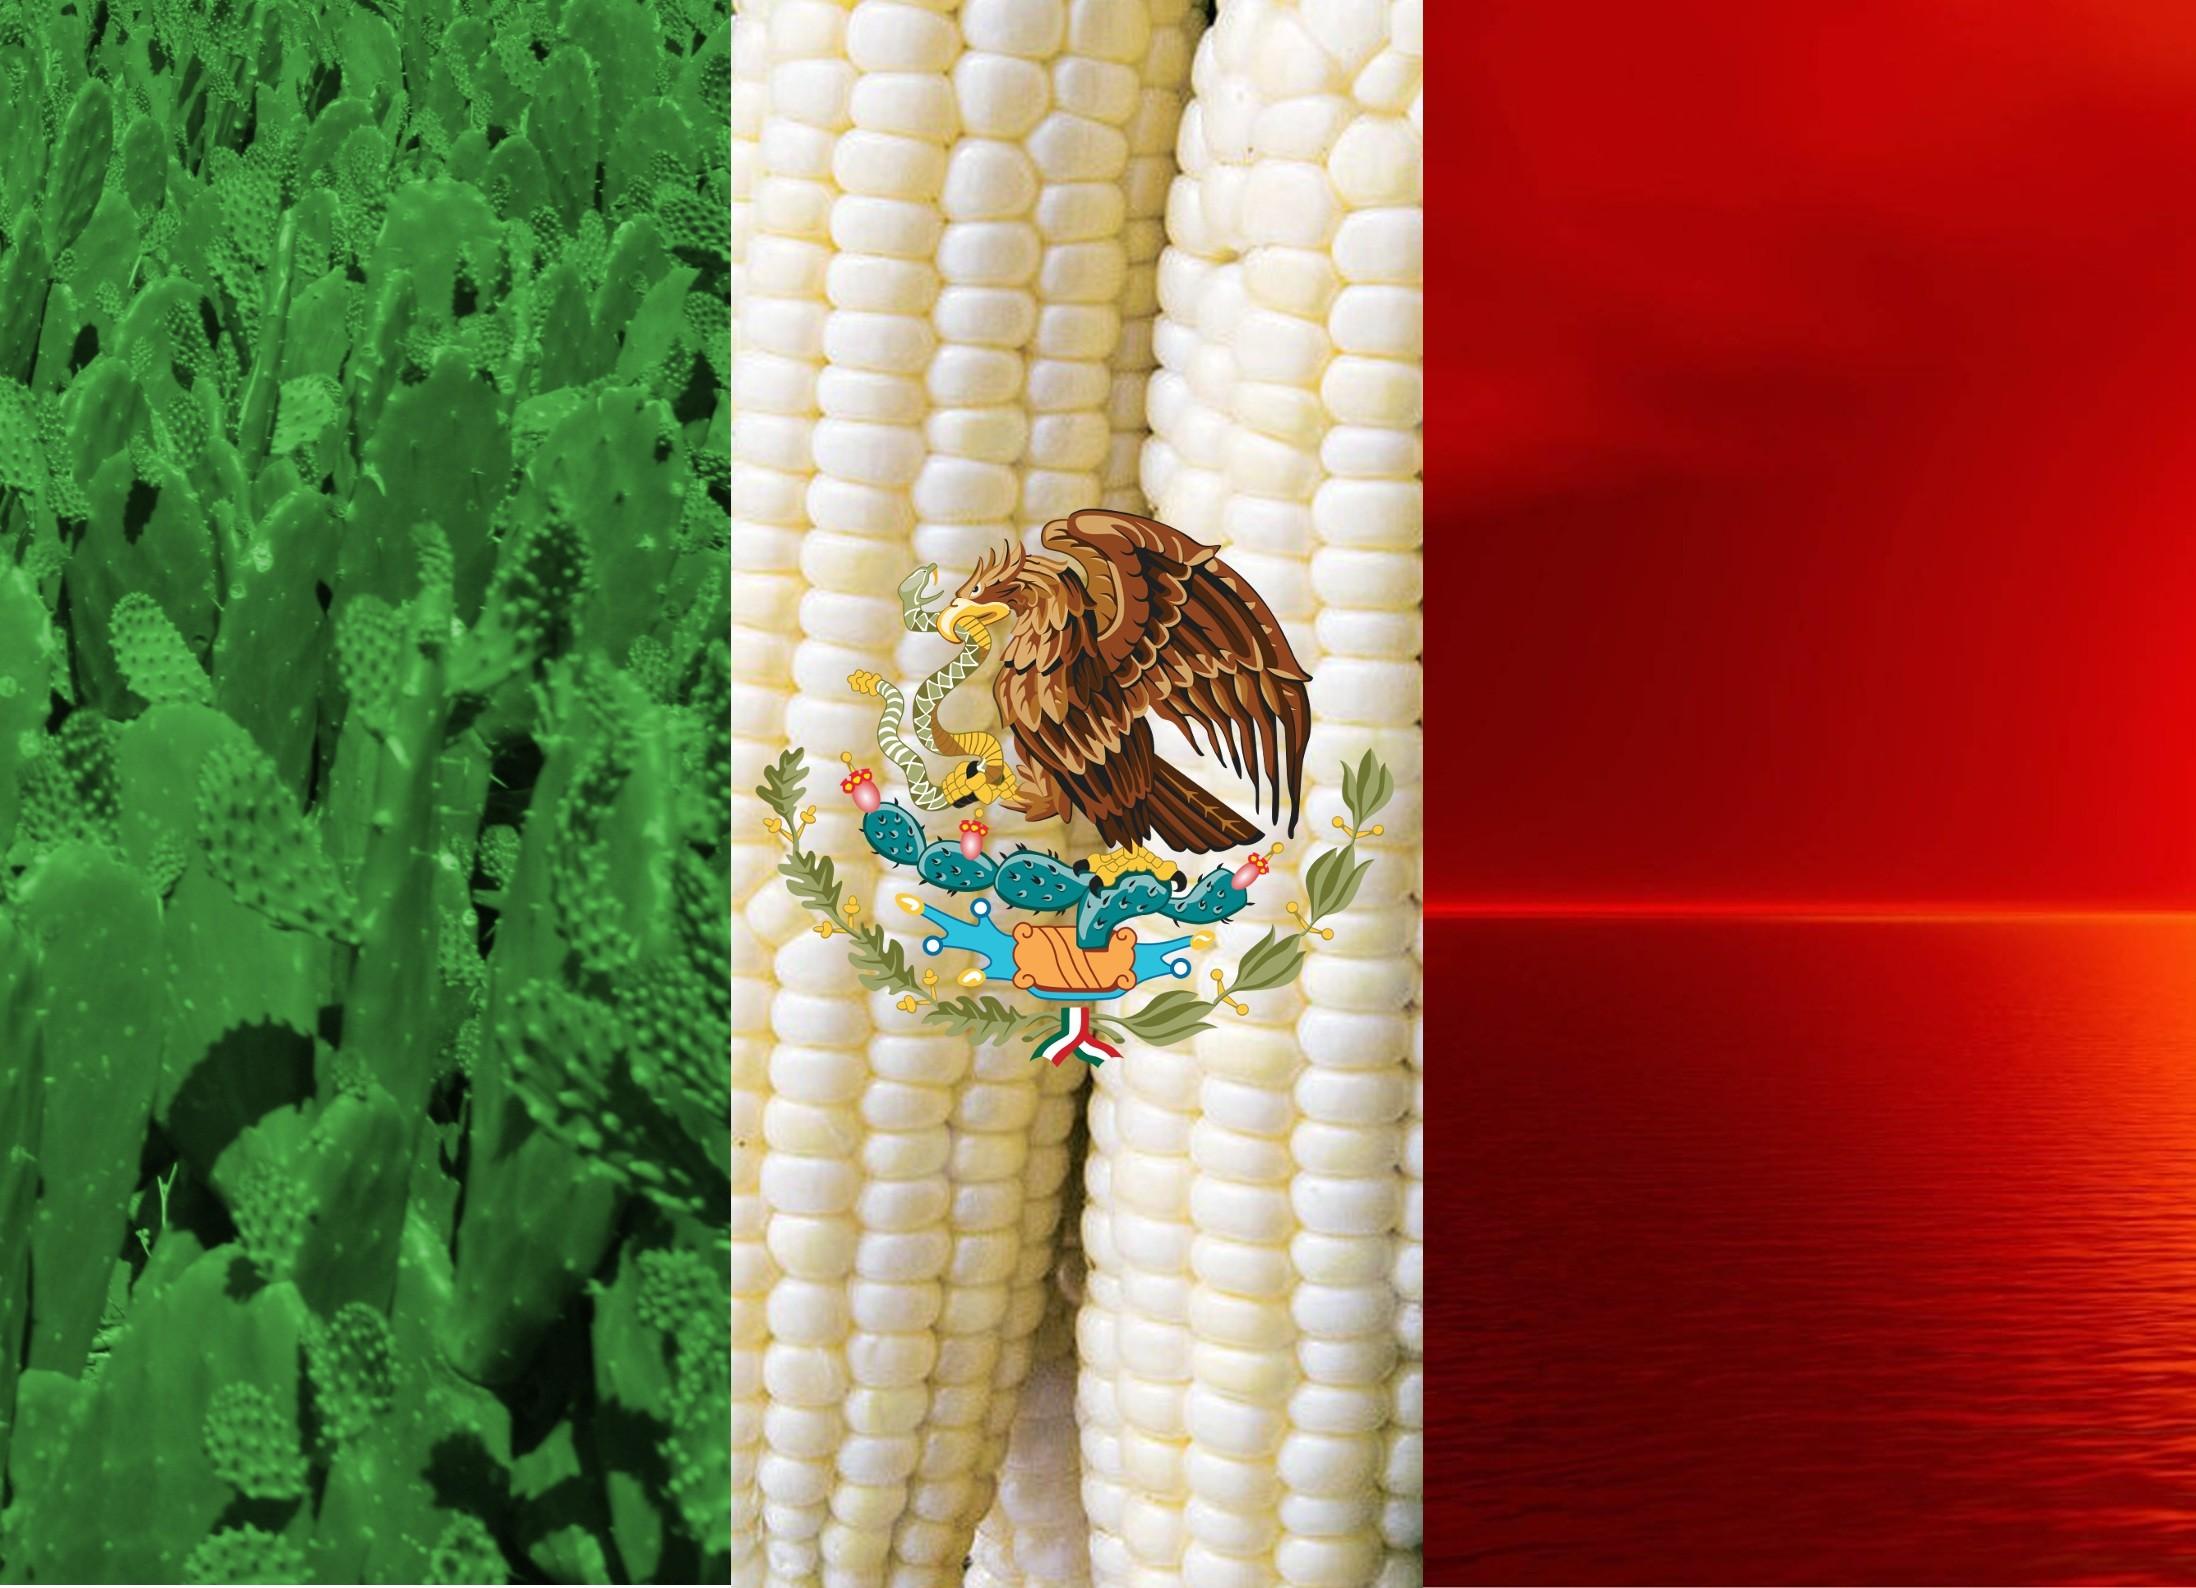 Mexican Flag Wallpaper iPhone 6